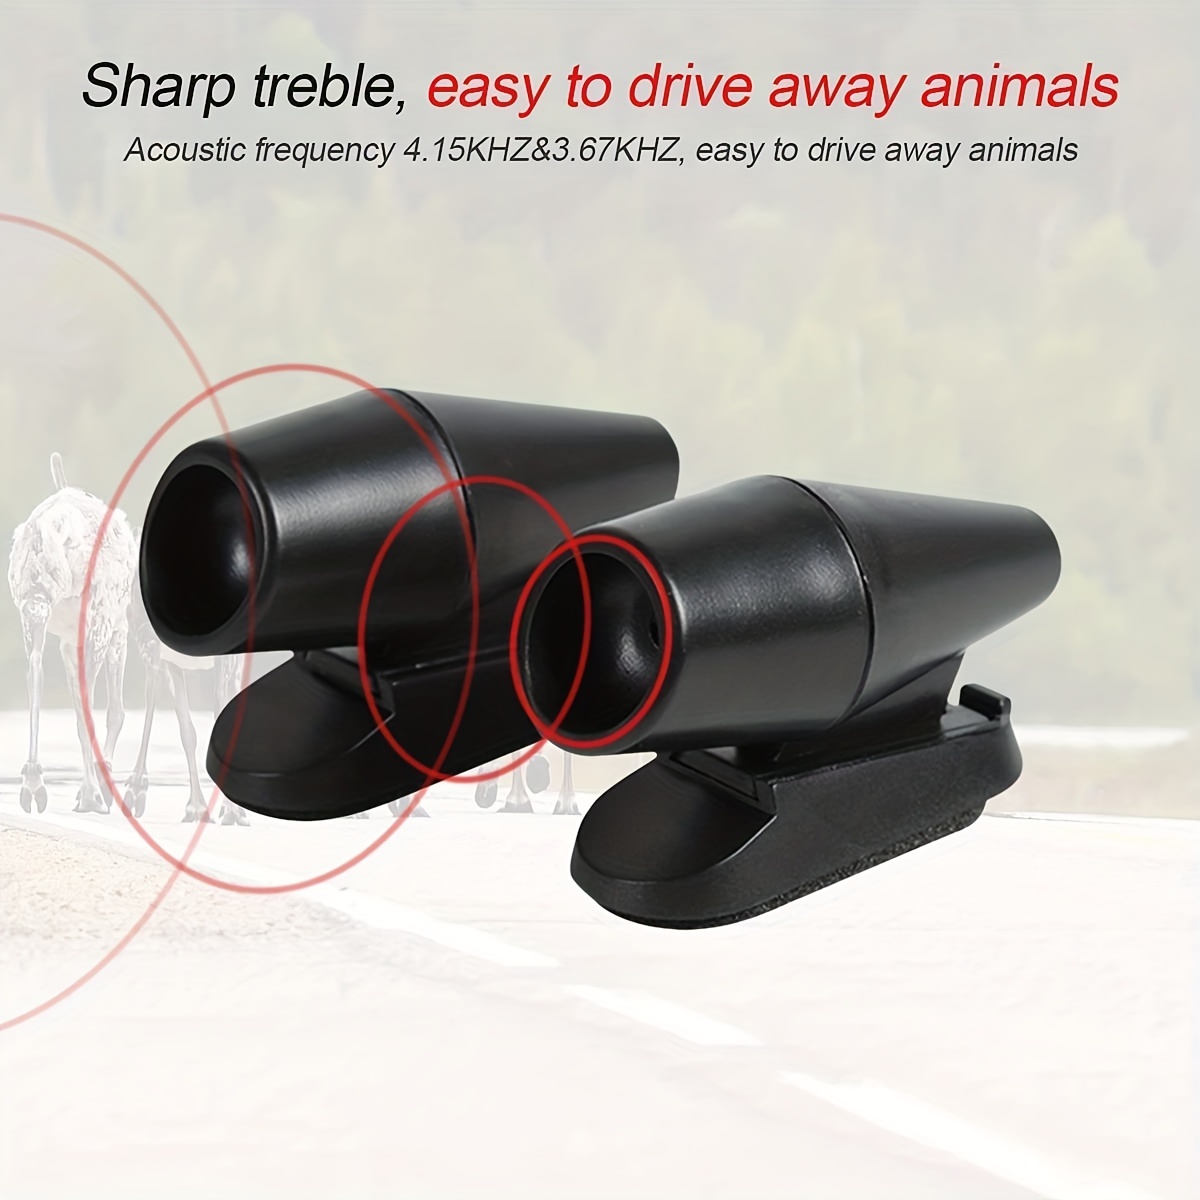 Deer Whistles Wildlife Warning Device Animal Sonic Alert Car Safety  Accessory